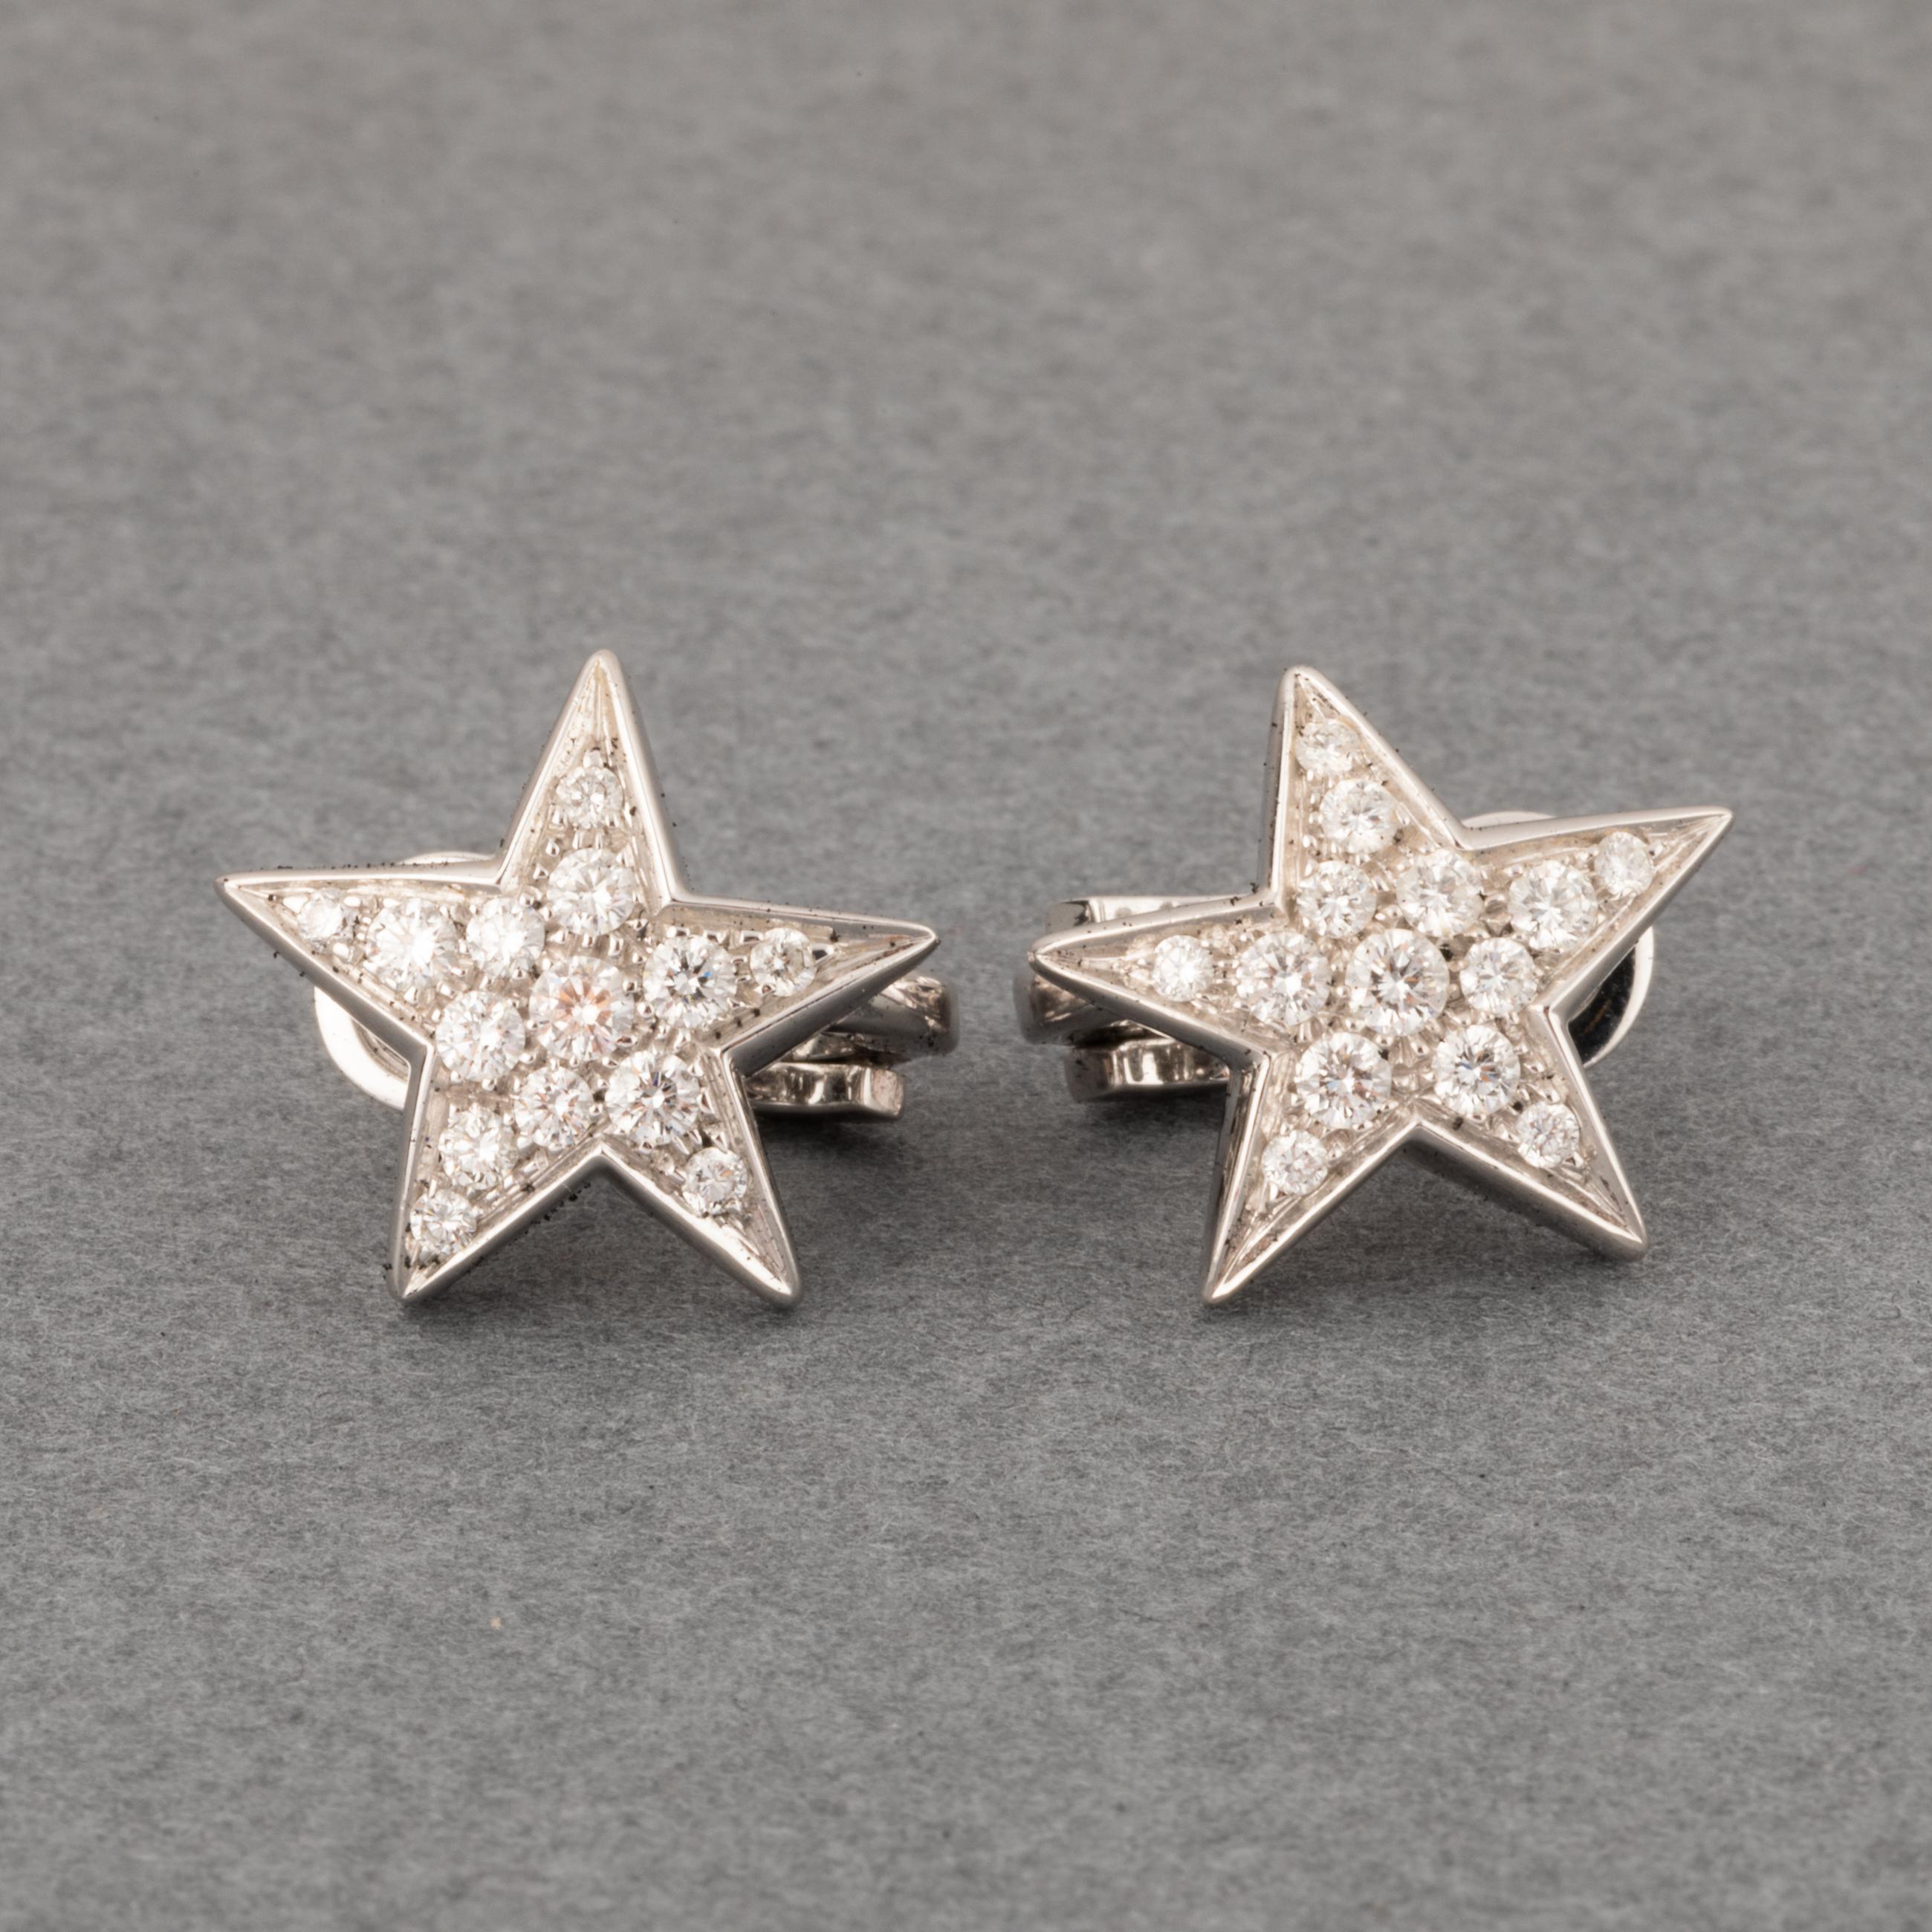 Round Cut Gold and Diamonds Chanel Star Earrings